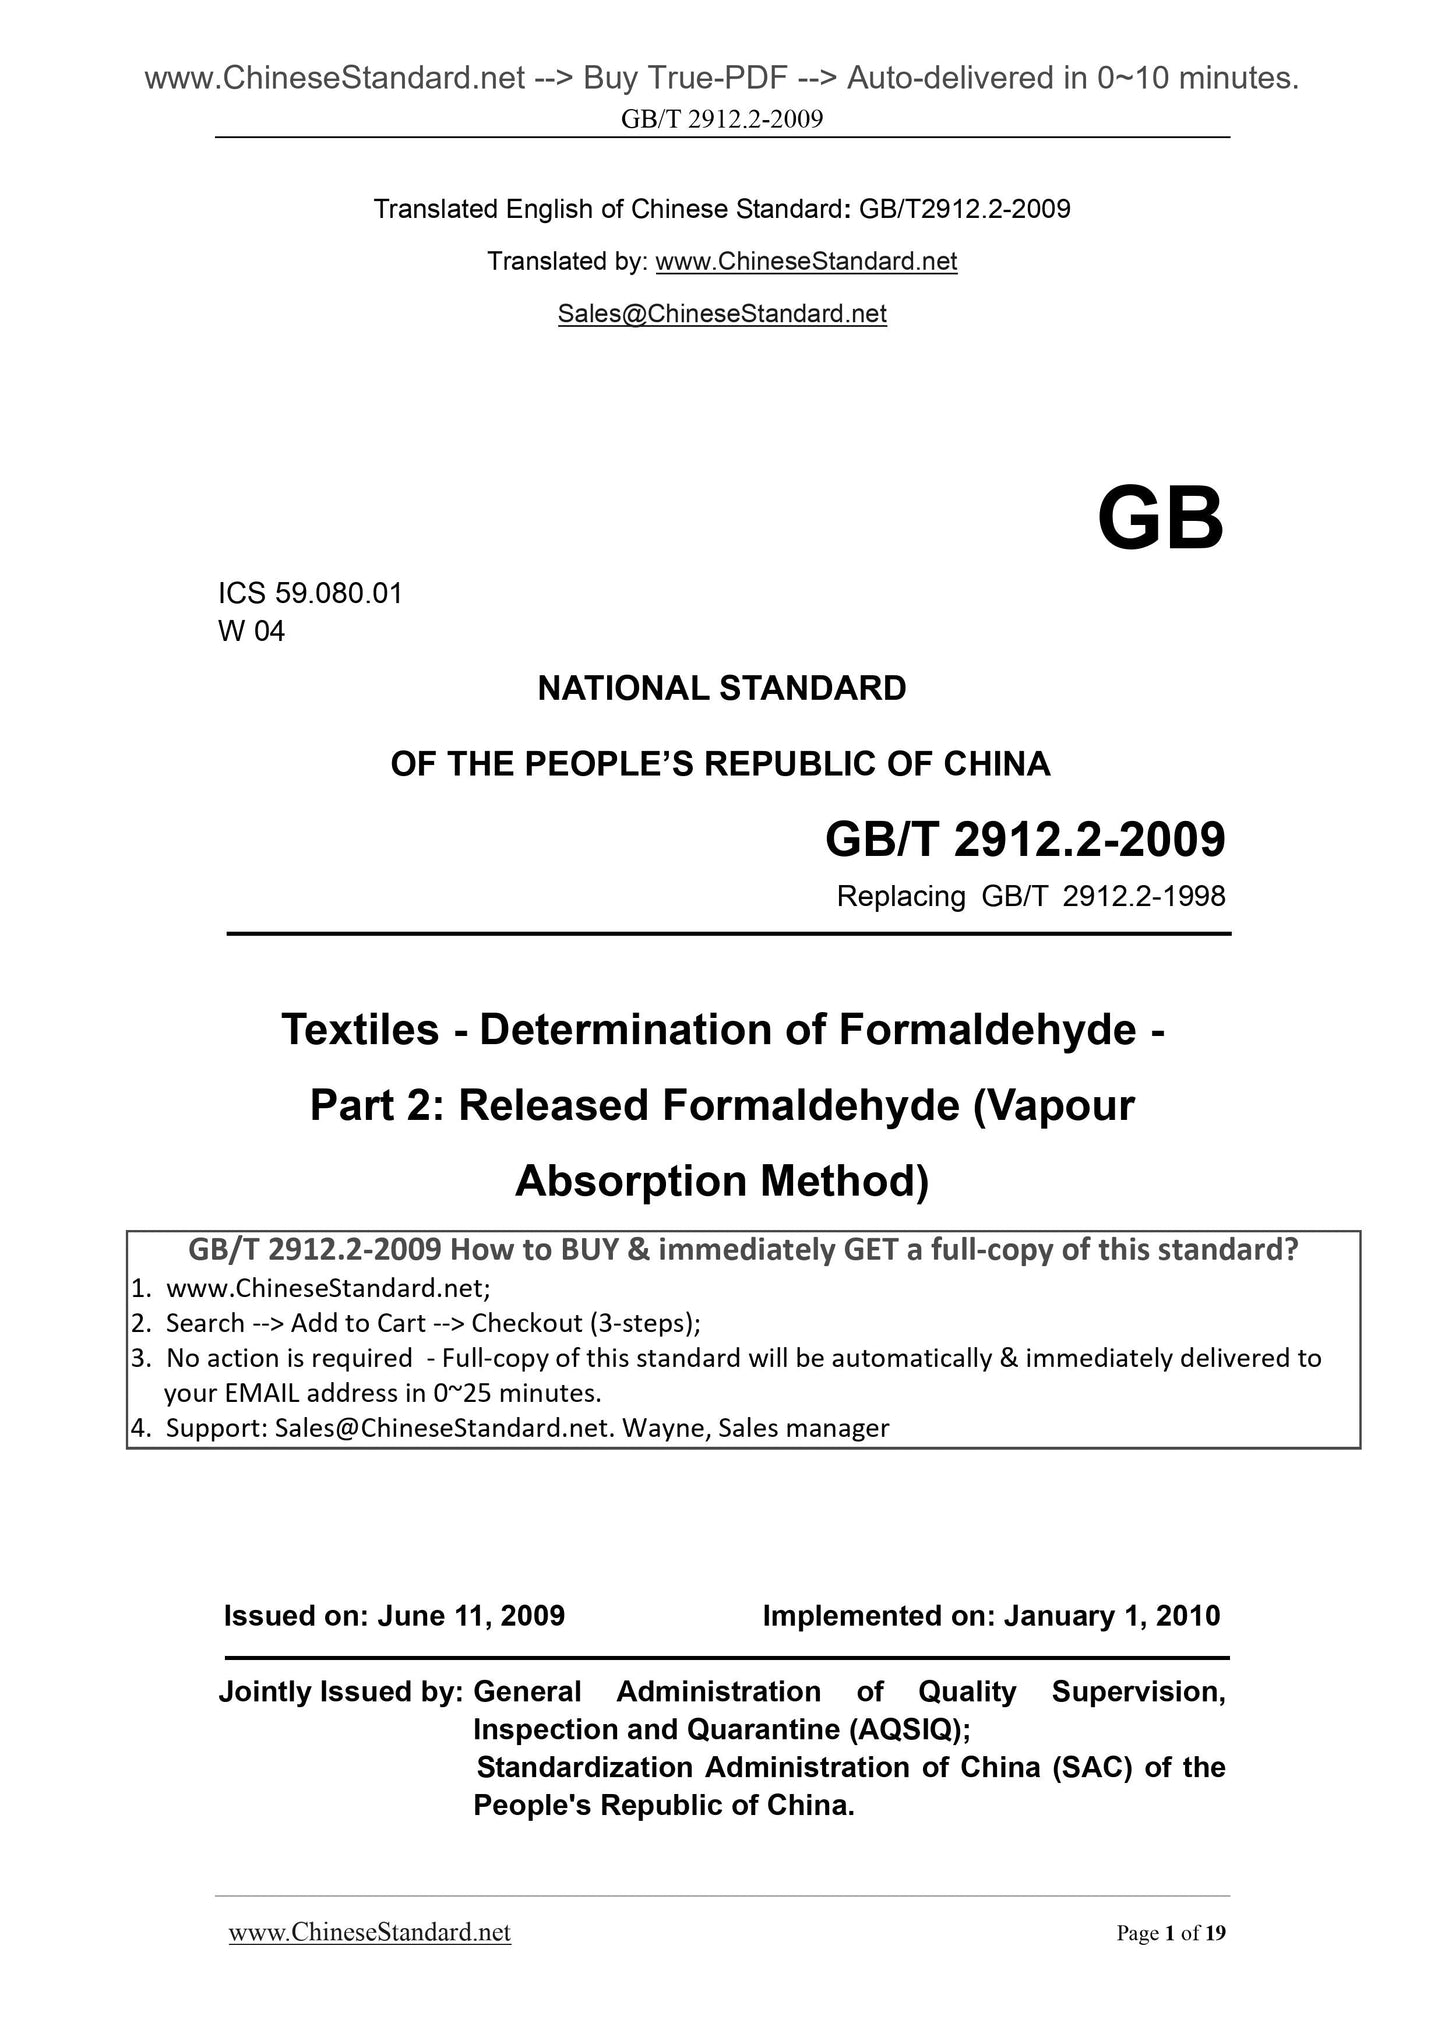 GB/T 2912.2-2009 Page 1